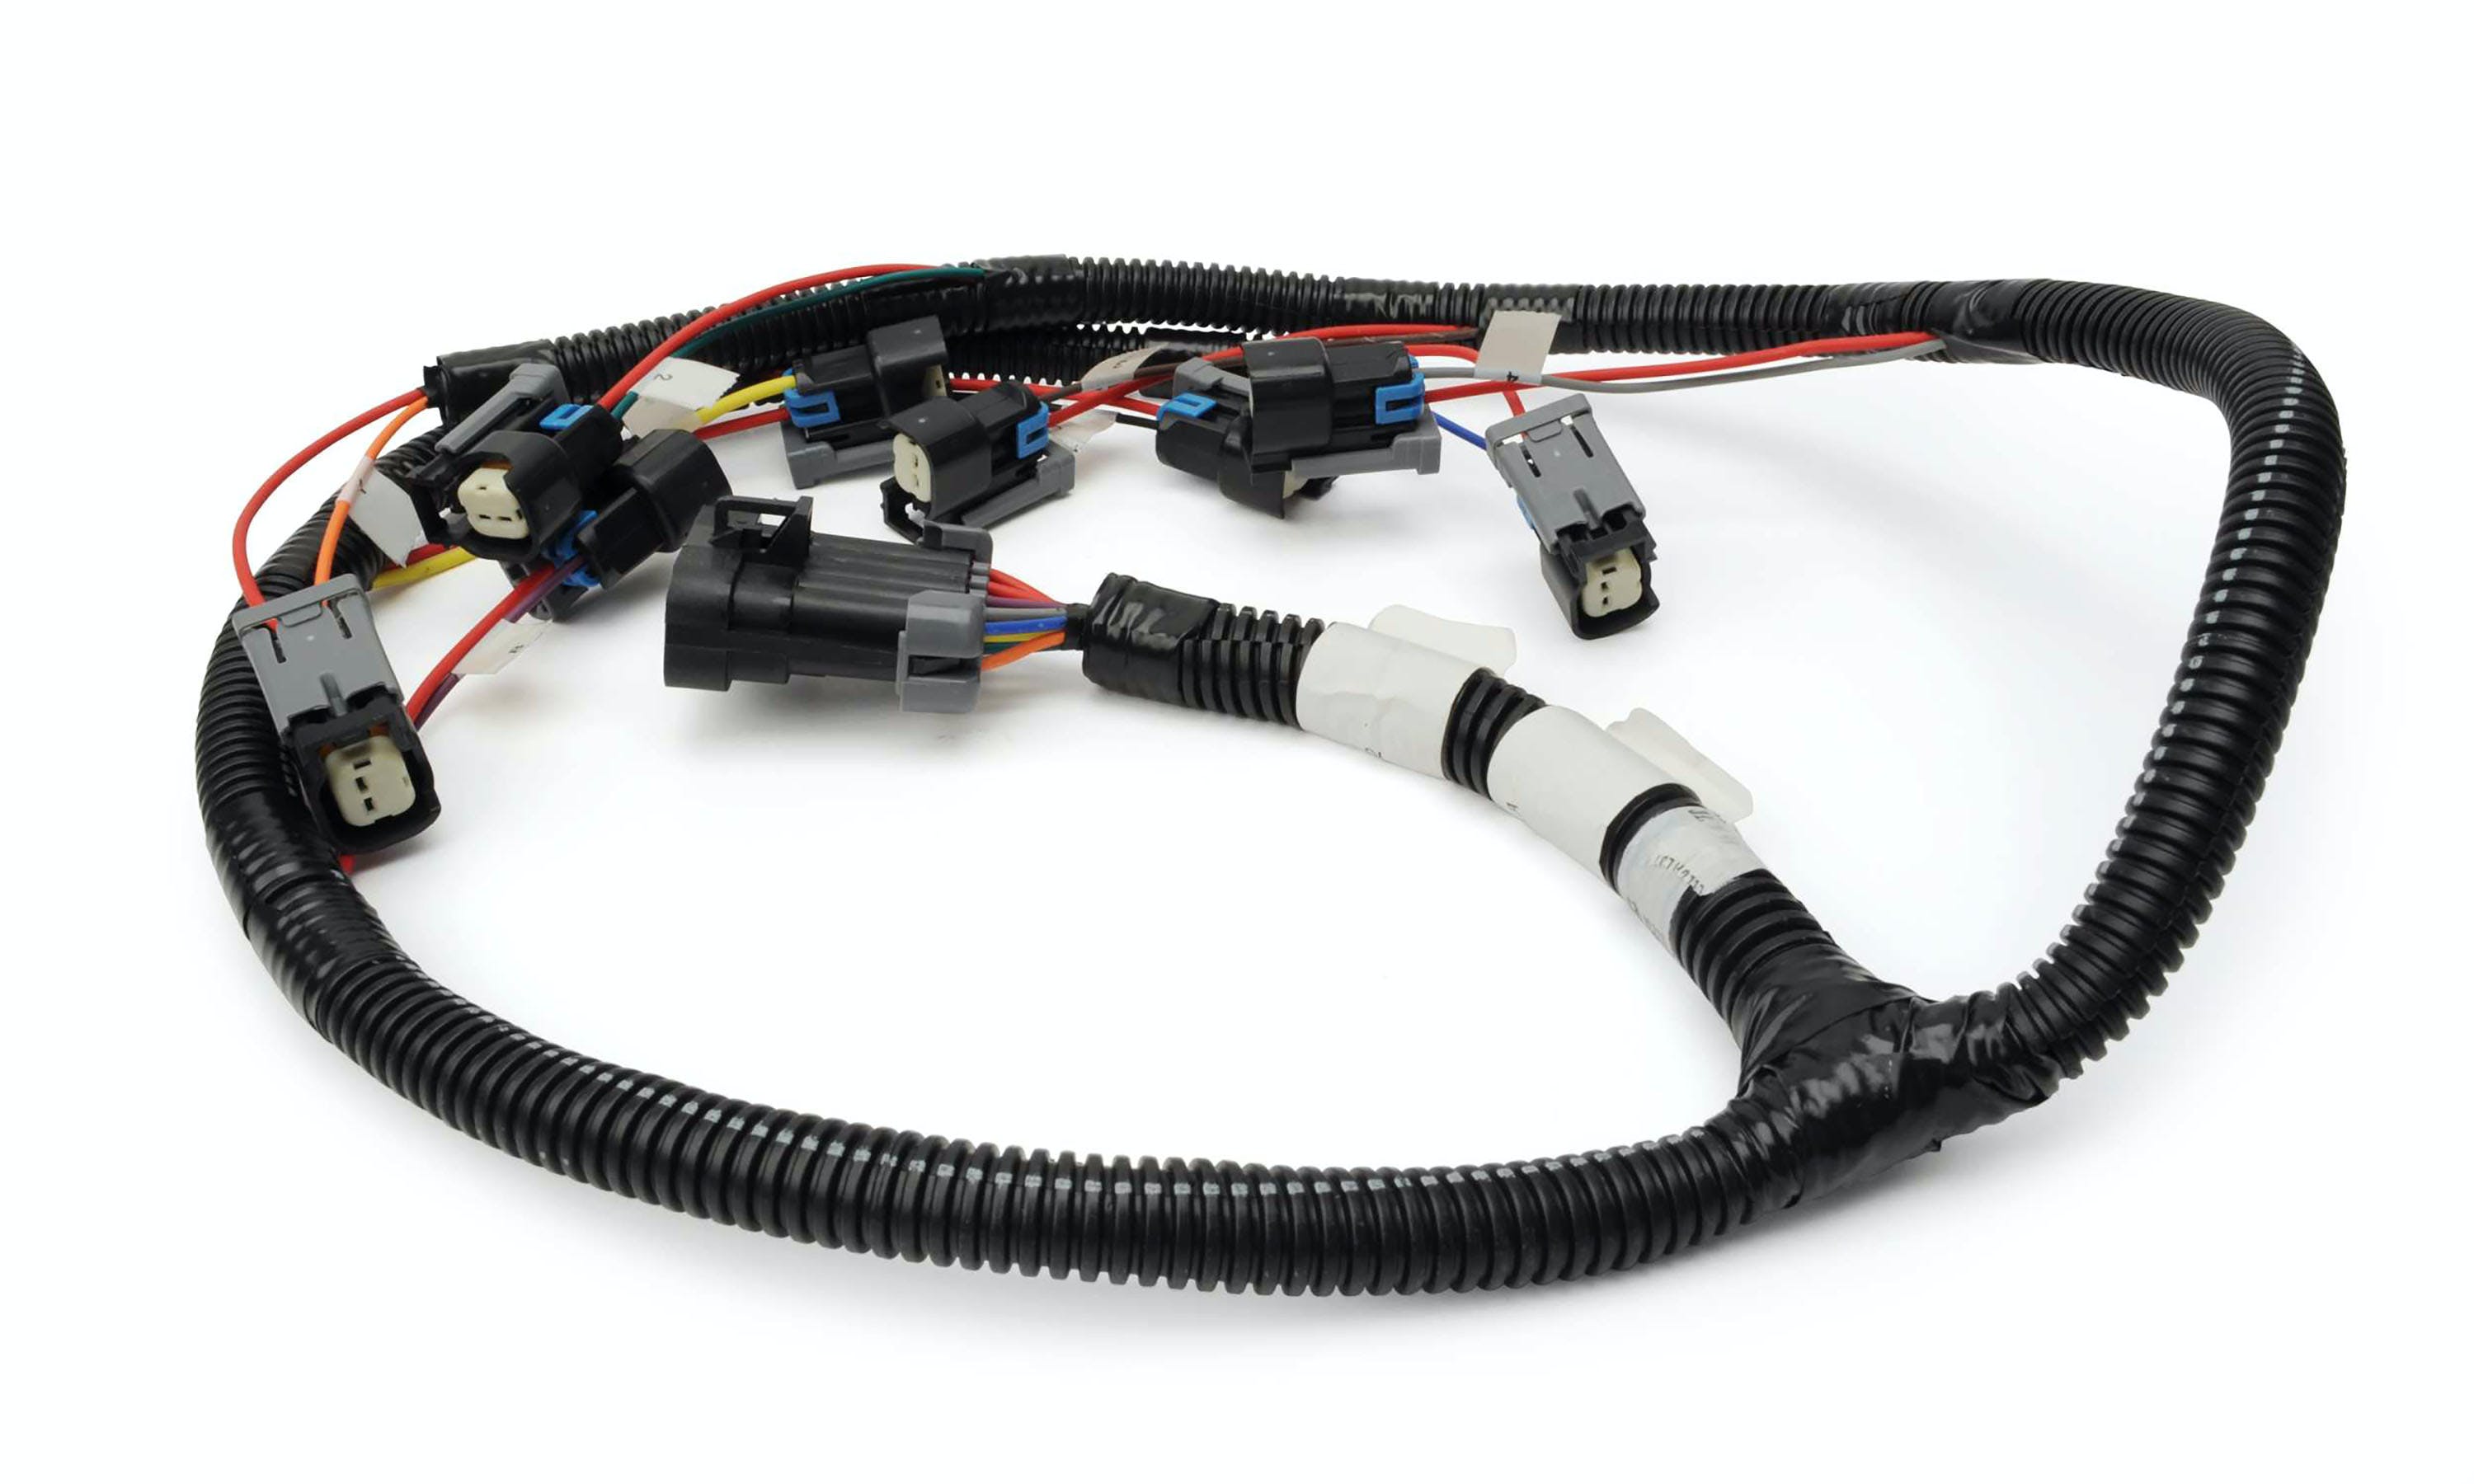 FAST - Fuel Air Spark Technology 301210 XFI Fuel Inector Harness for Ford Coyote Series engines.